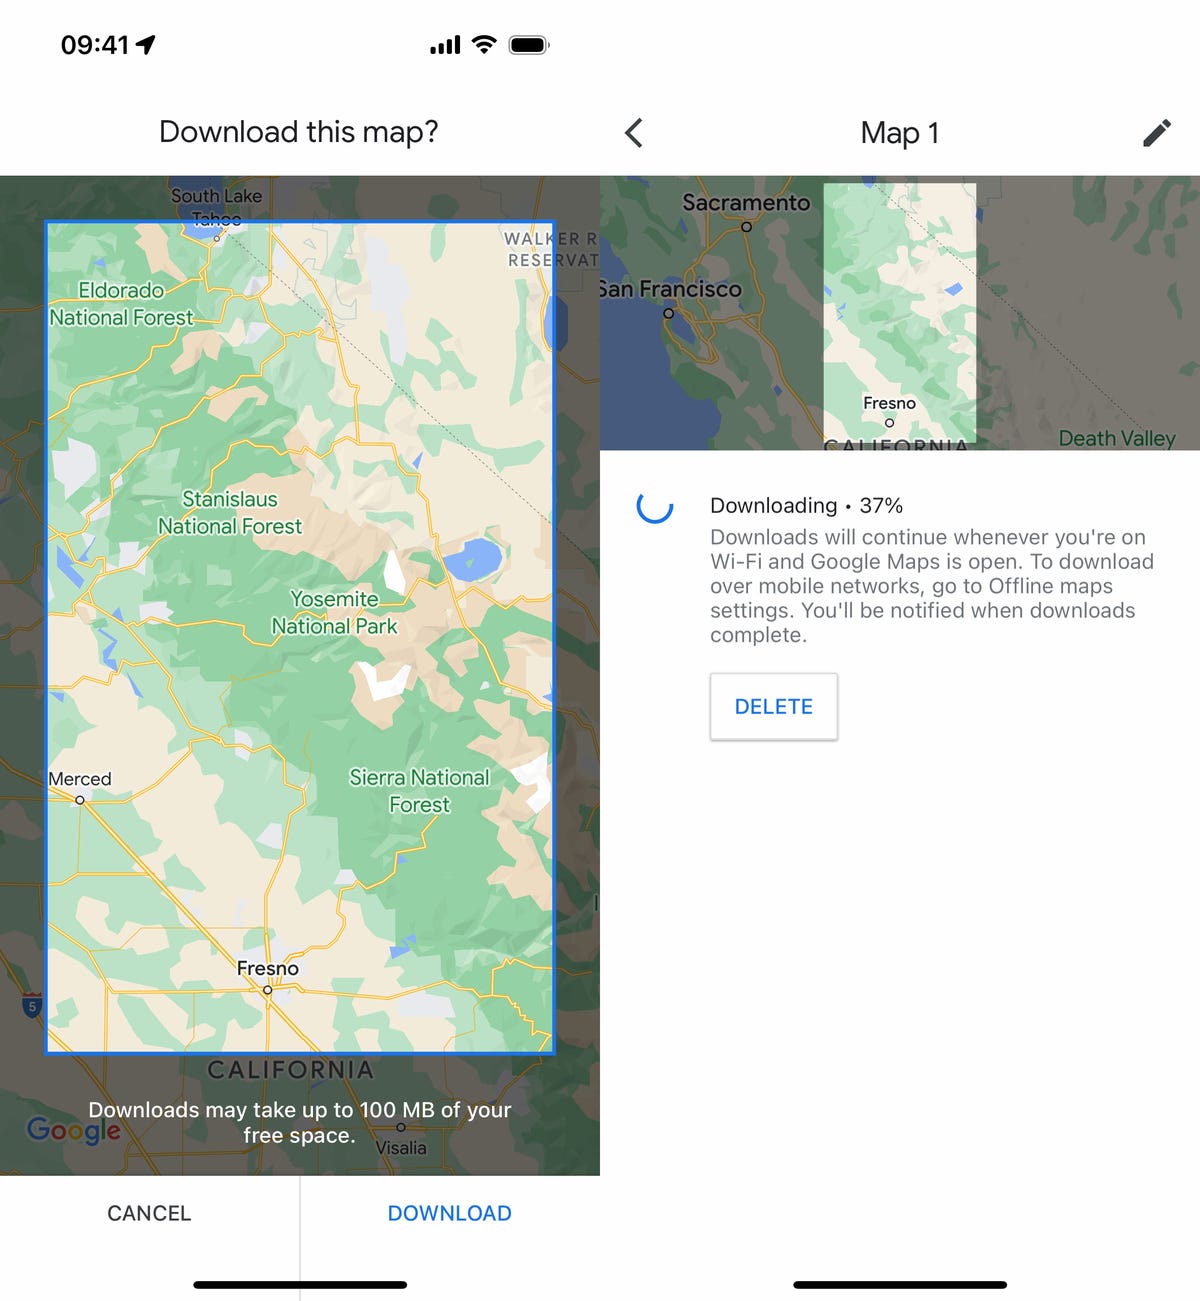 Choosing the map you want to download offline in Google Maps